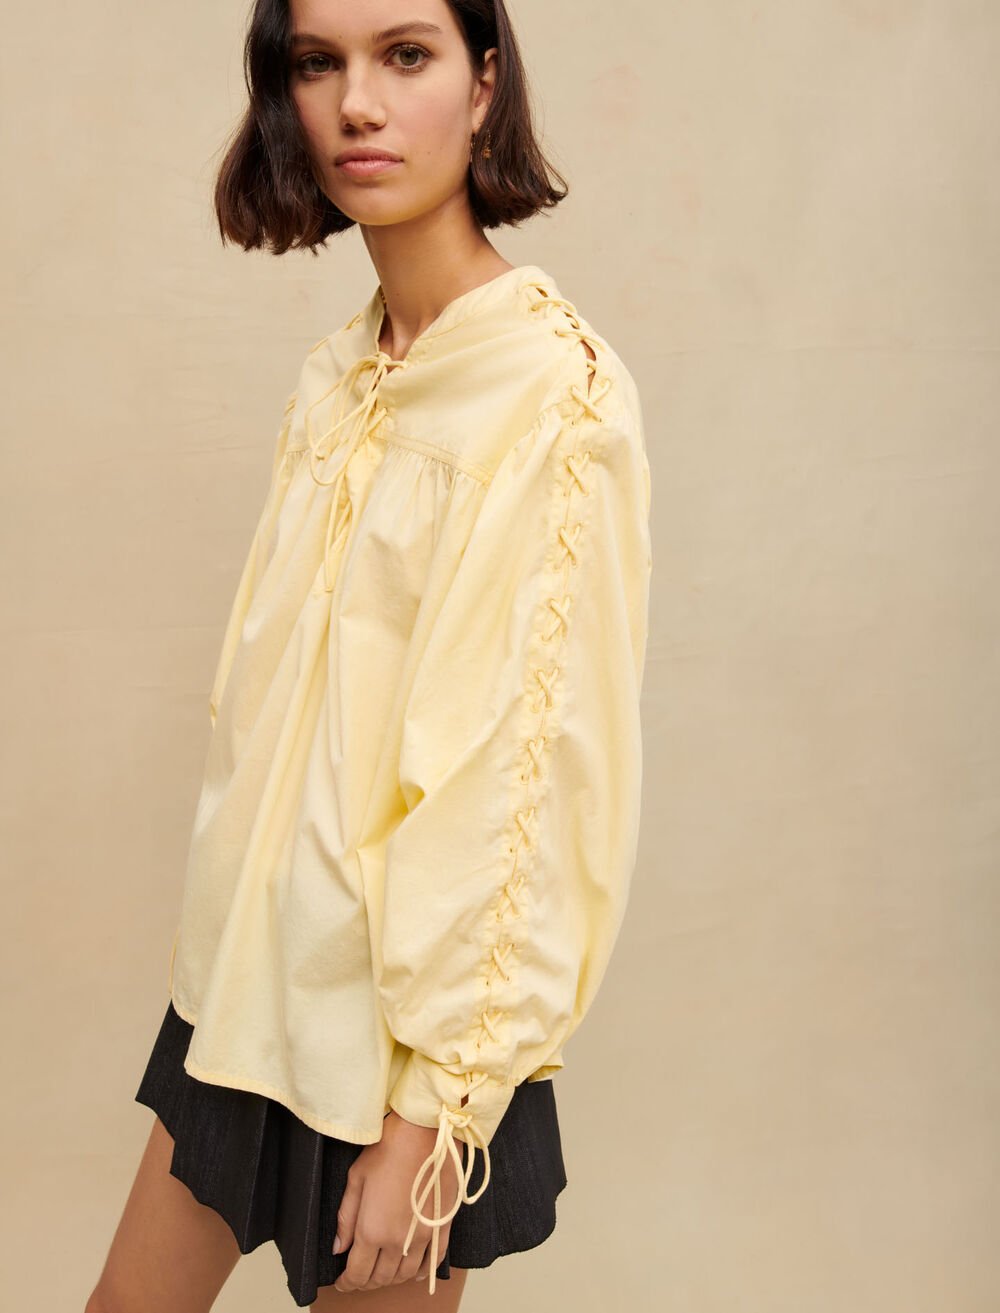 223LAMIL Medieval-style laced cotton shirt - Tops & Shirts - Maje.com